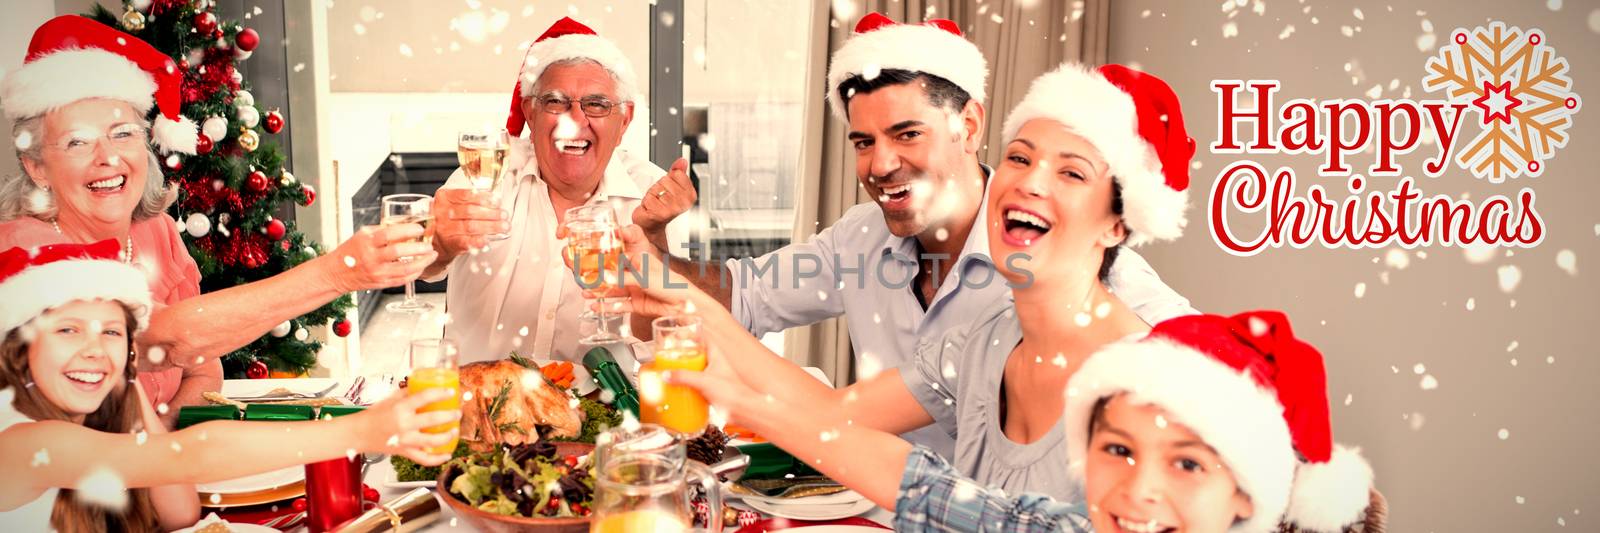 Family in santas hats toasting wine glasses at dining table against christmas card